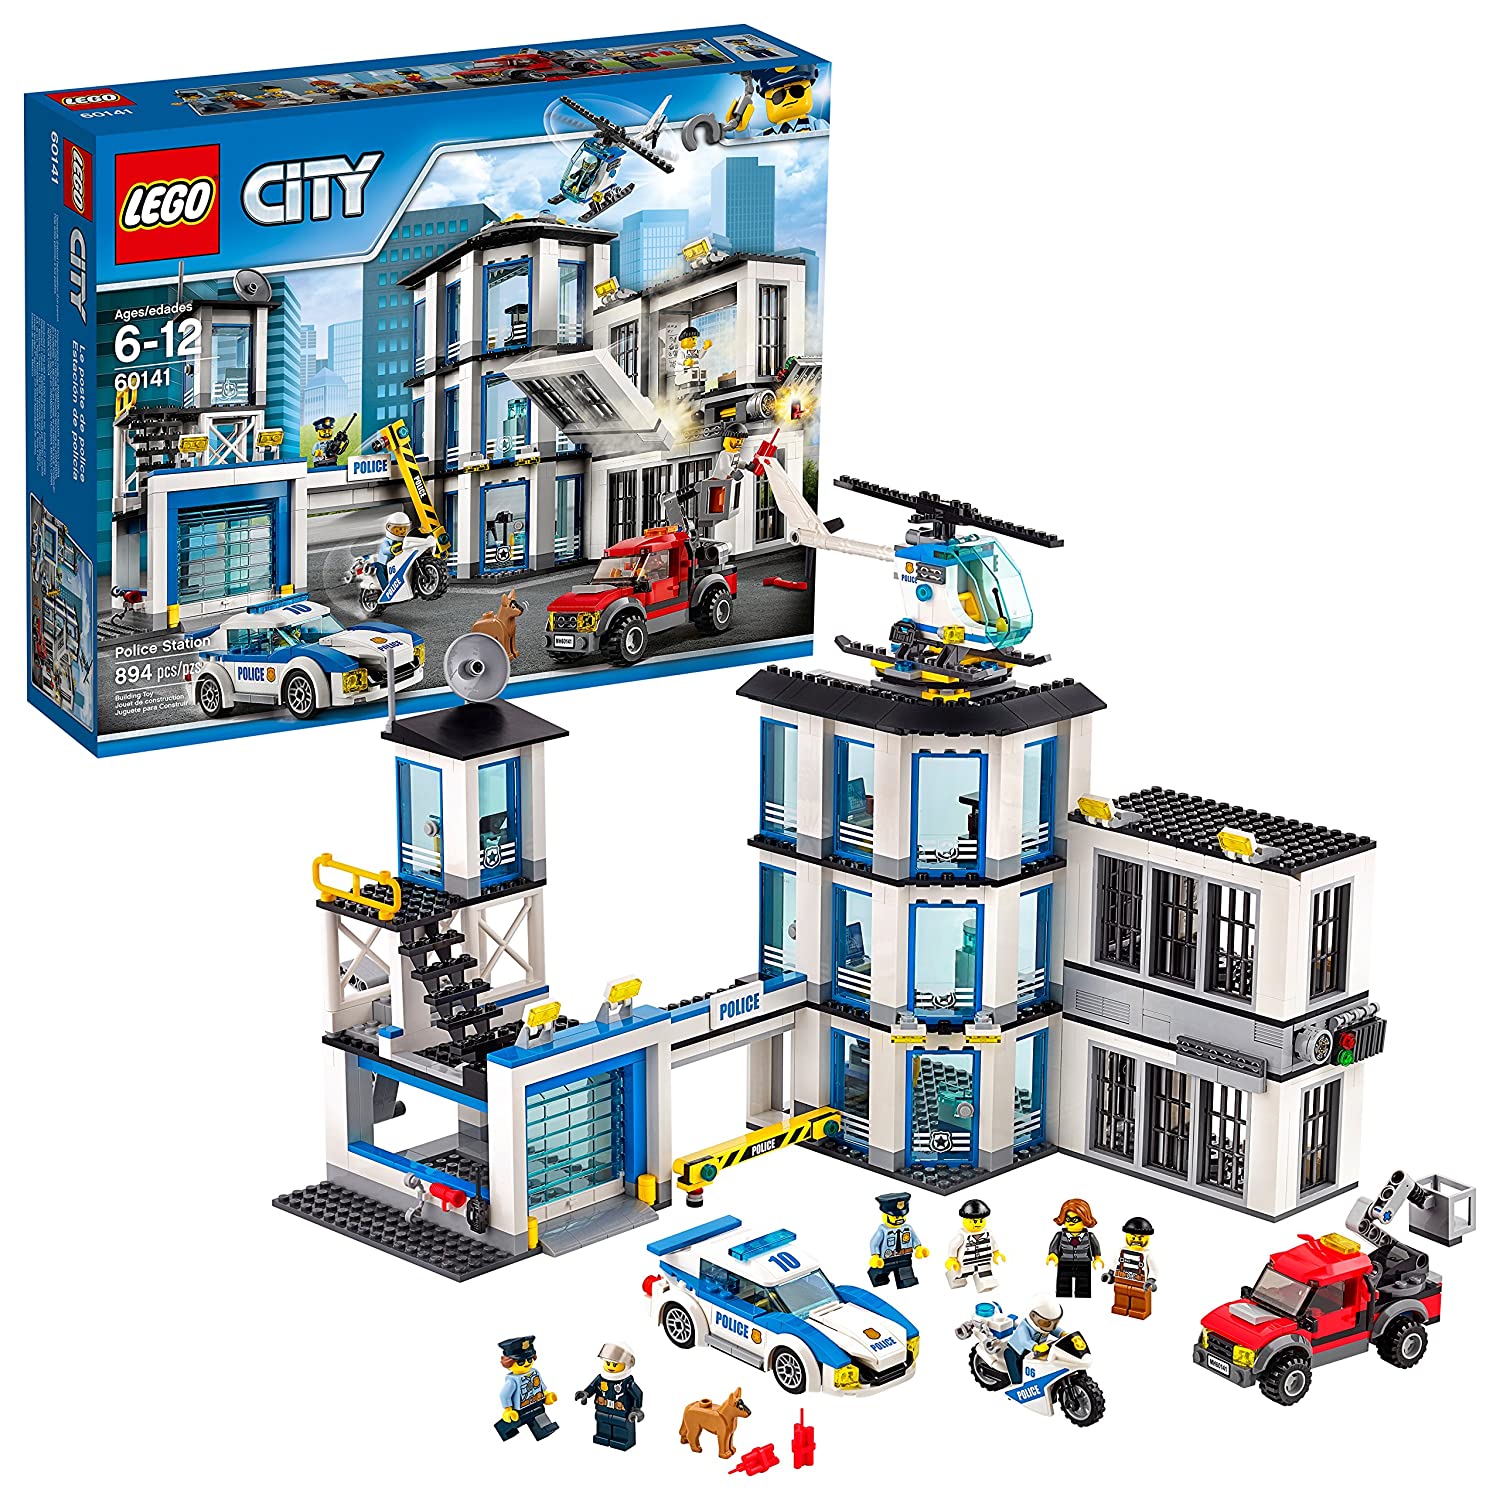 9 Best LEGO Police Station Set 2022 - Buying Guide & Reviews 1